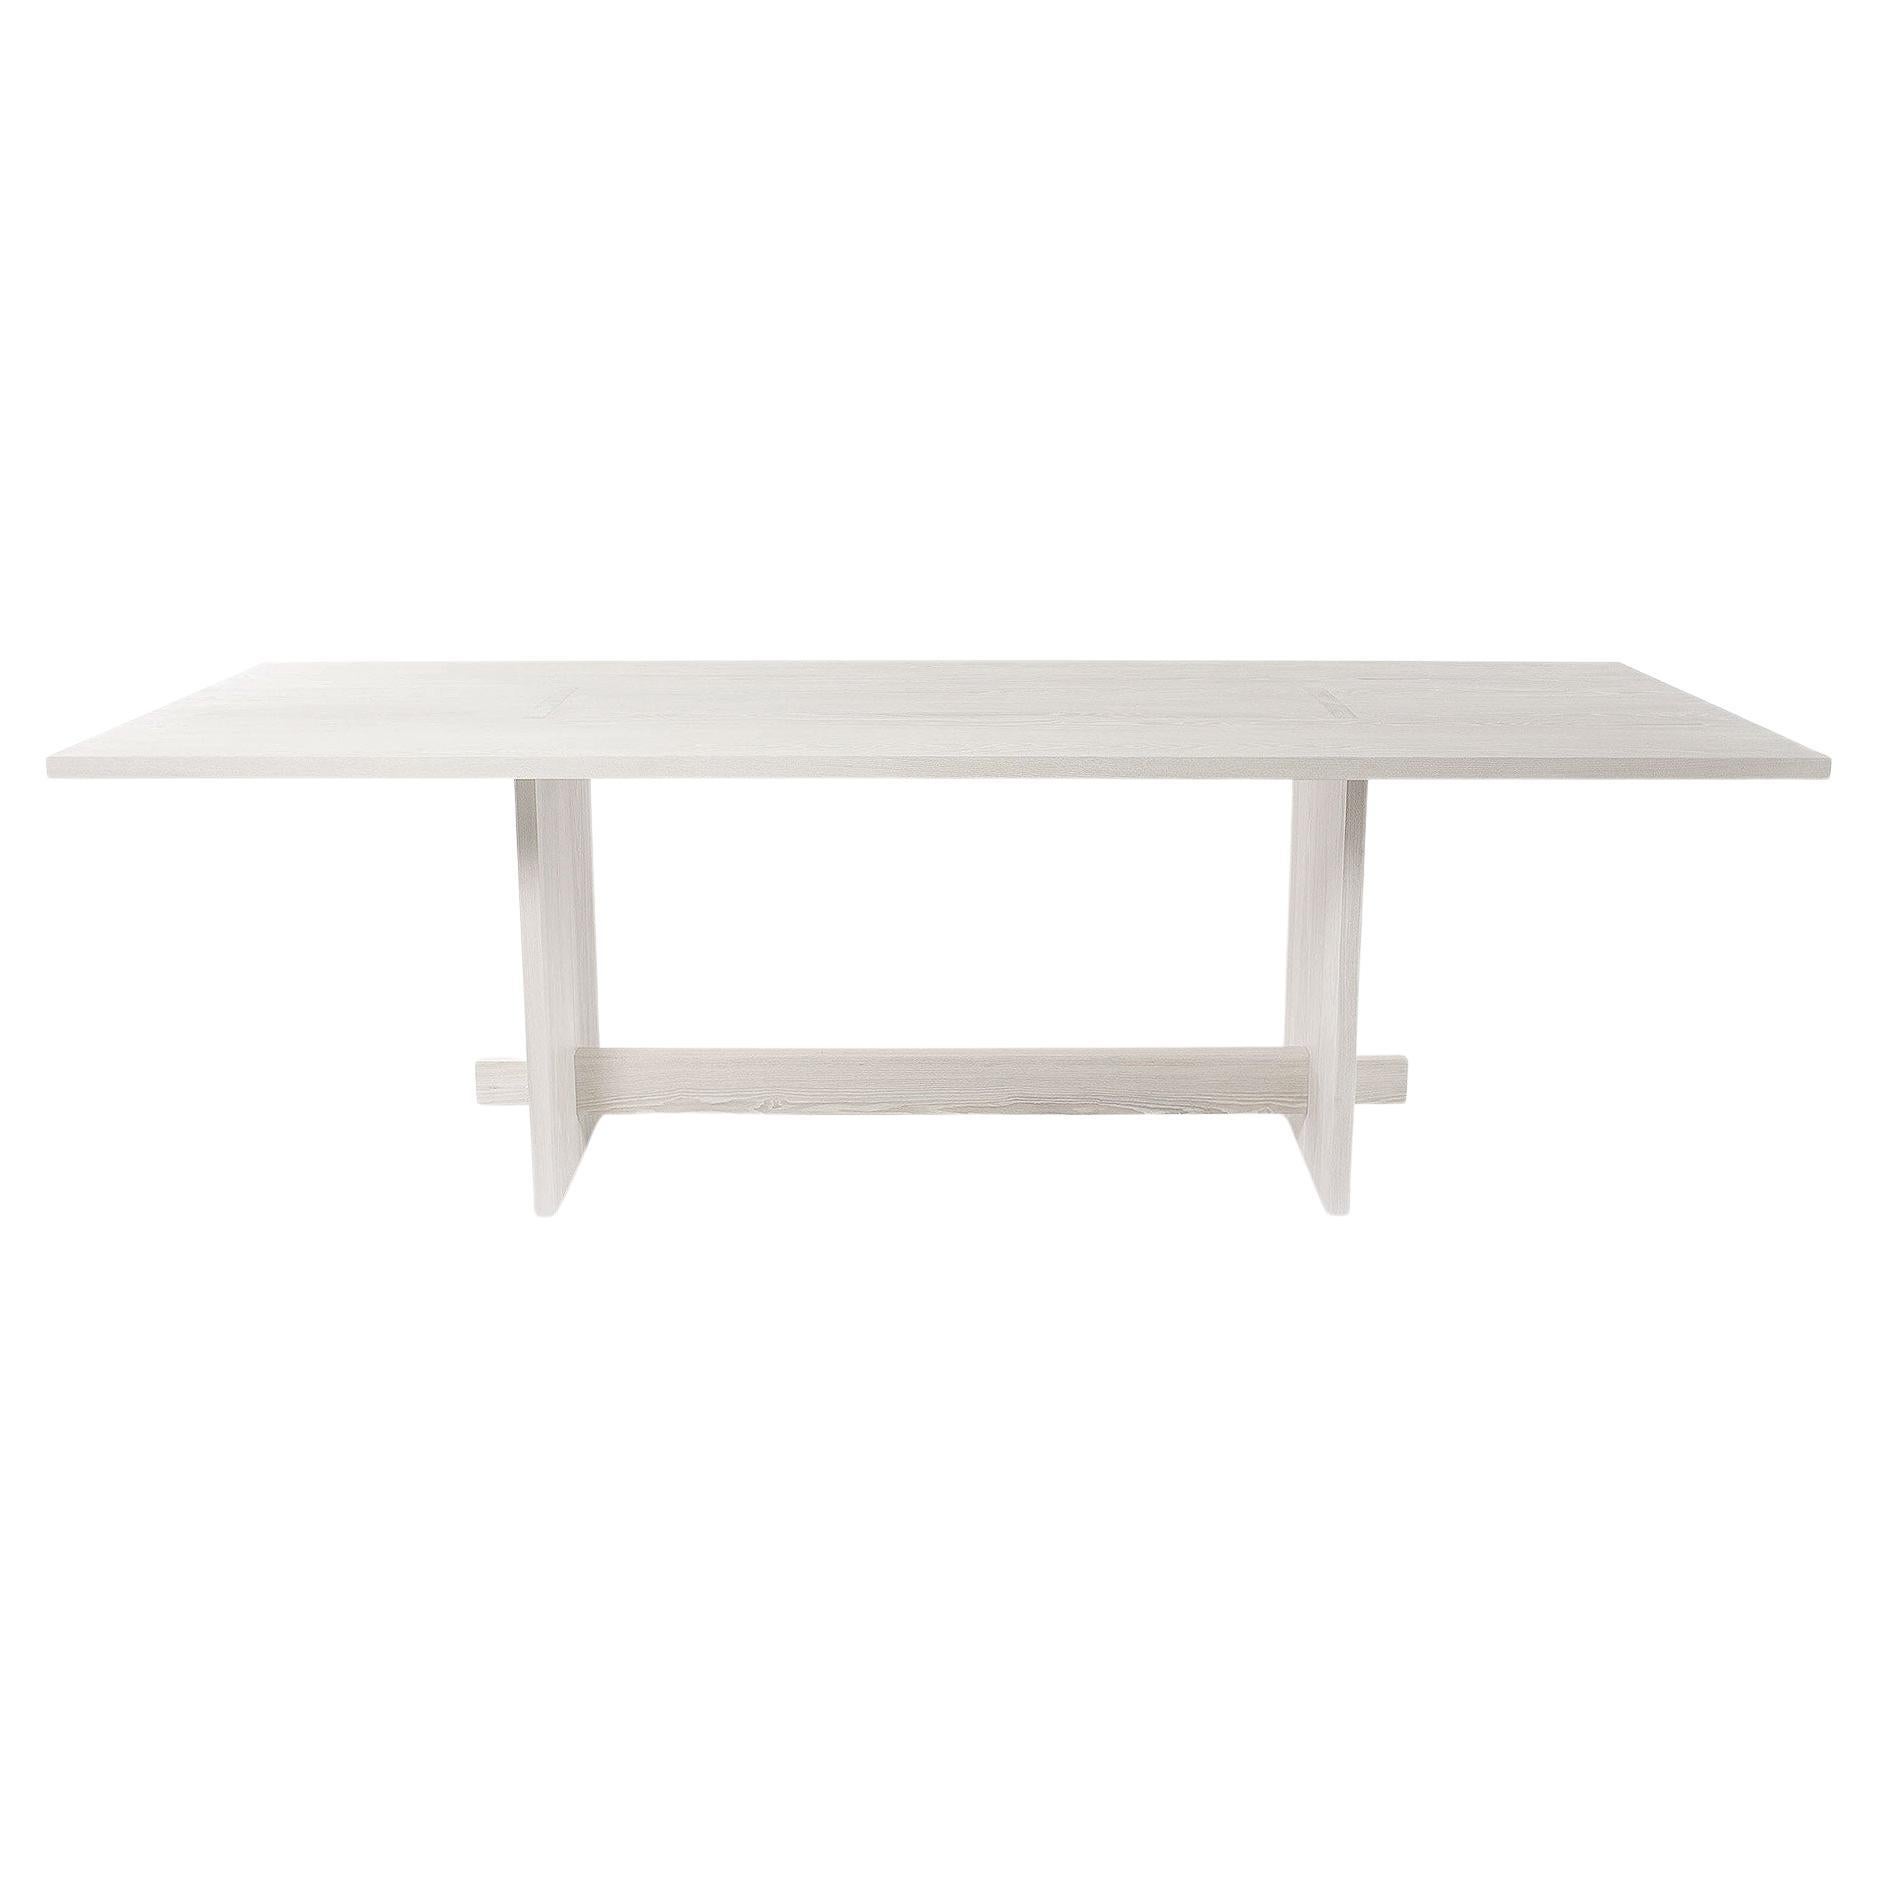 Handcrafted Solid White Ash Himes Dining Table 84"L by Mary Ratcliffe Studio